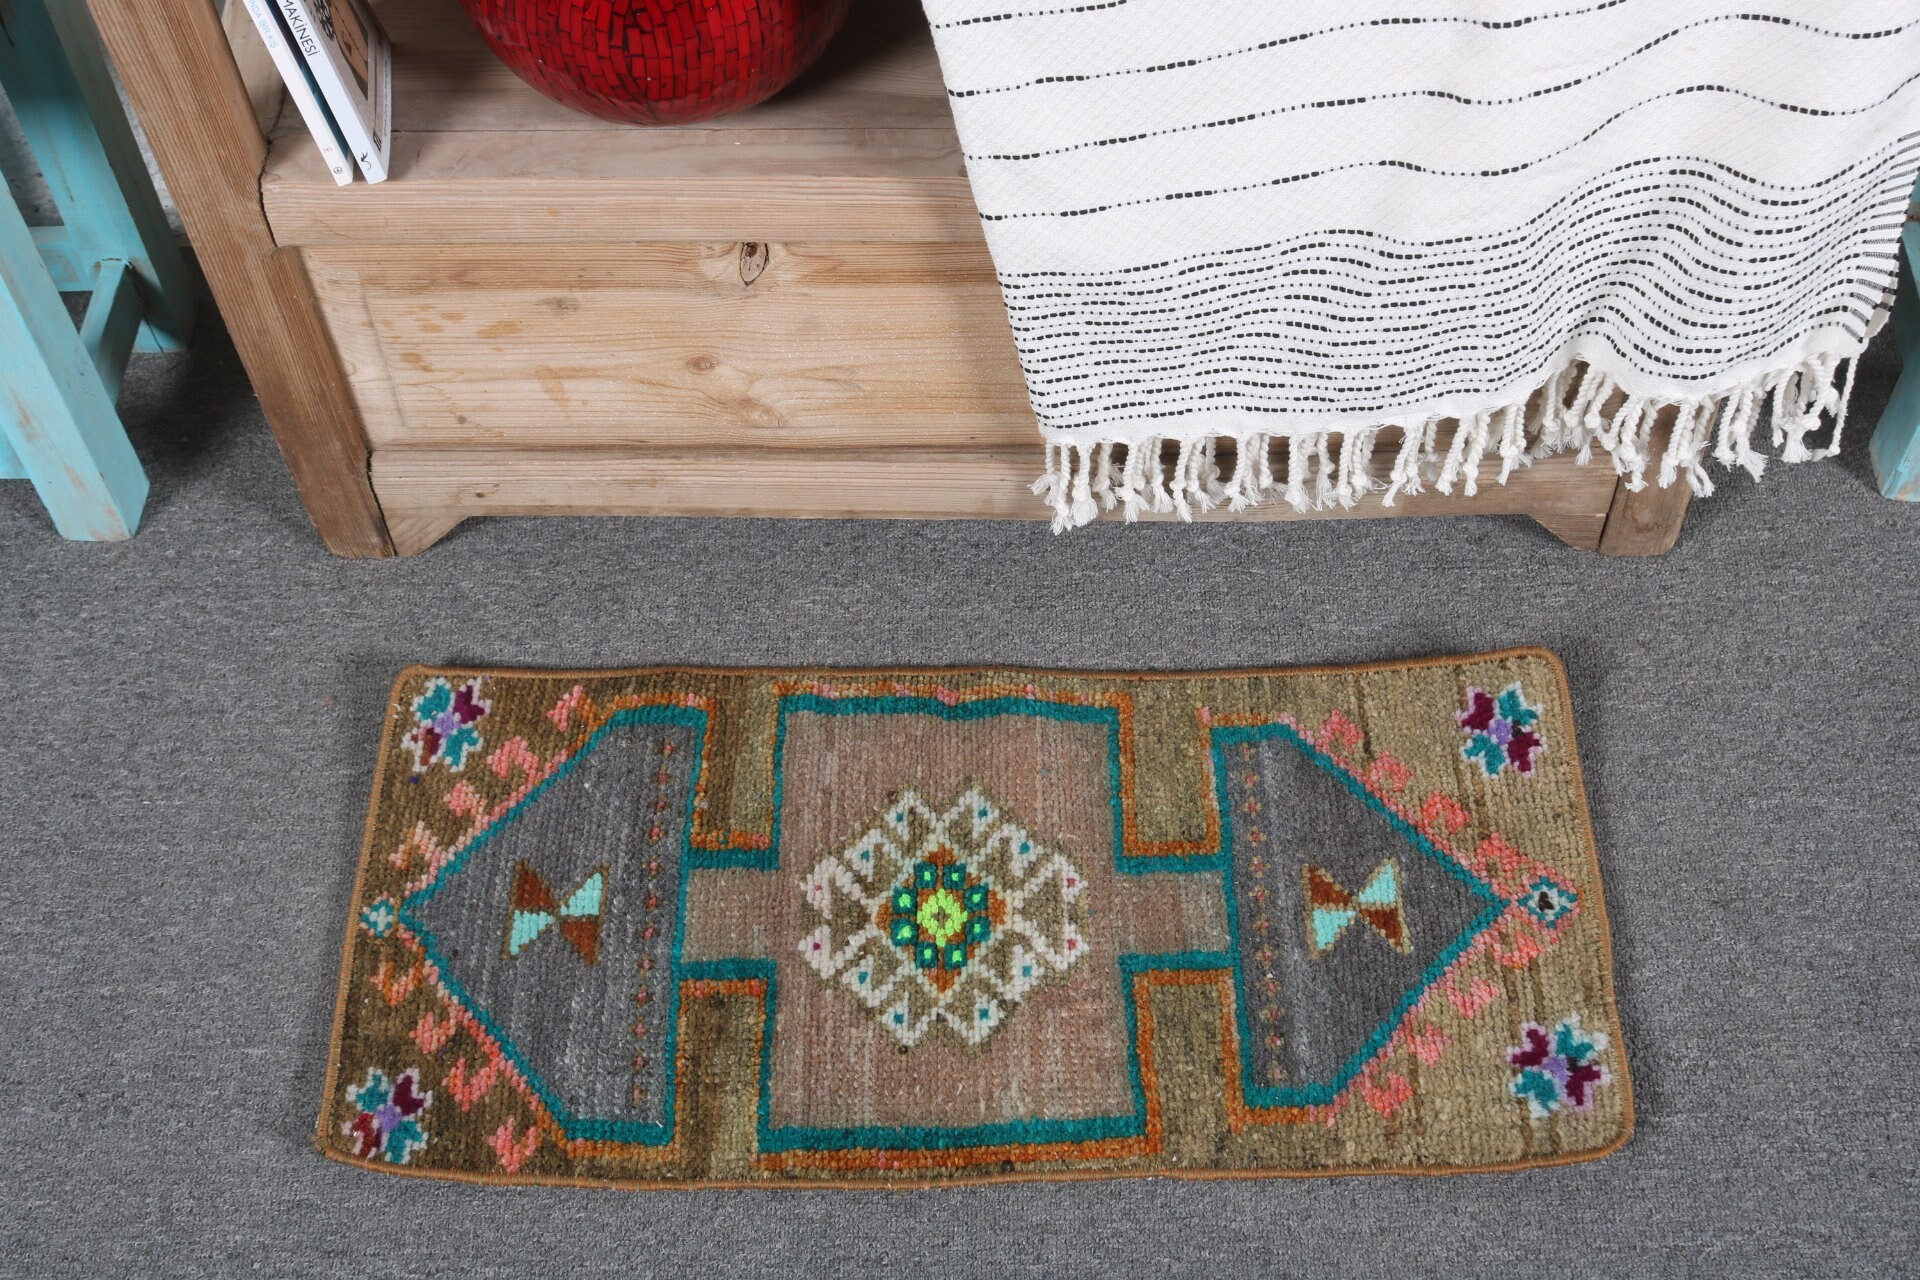 Muted Rug, Green Bedroom Rug, Rugs for Wall Hanging, Vintage Rugs, Antique Rug, Anatolian Rugs, Entry Rug, 1x2.2 ft Small Rug, Turkish Rugs